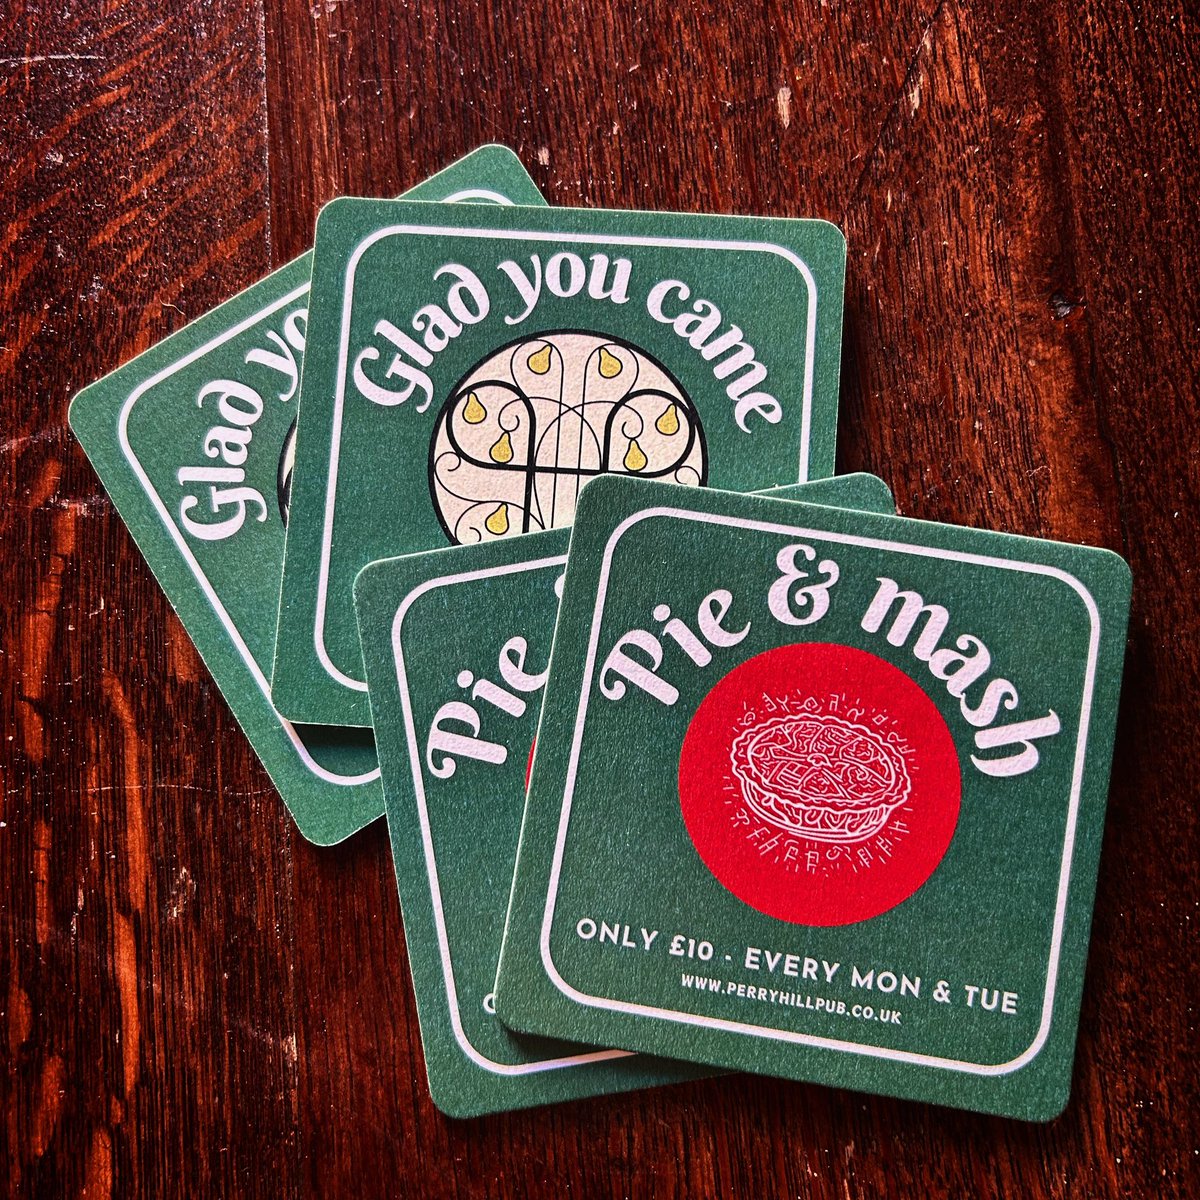 New beermats are here!